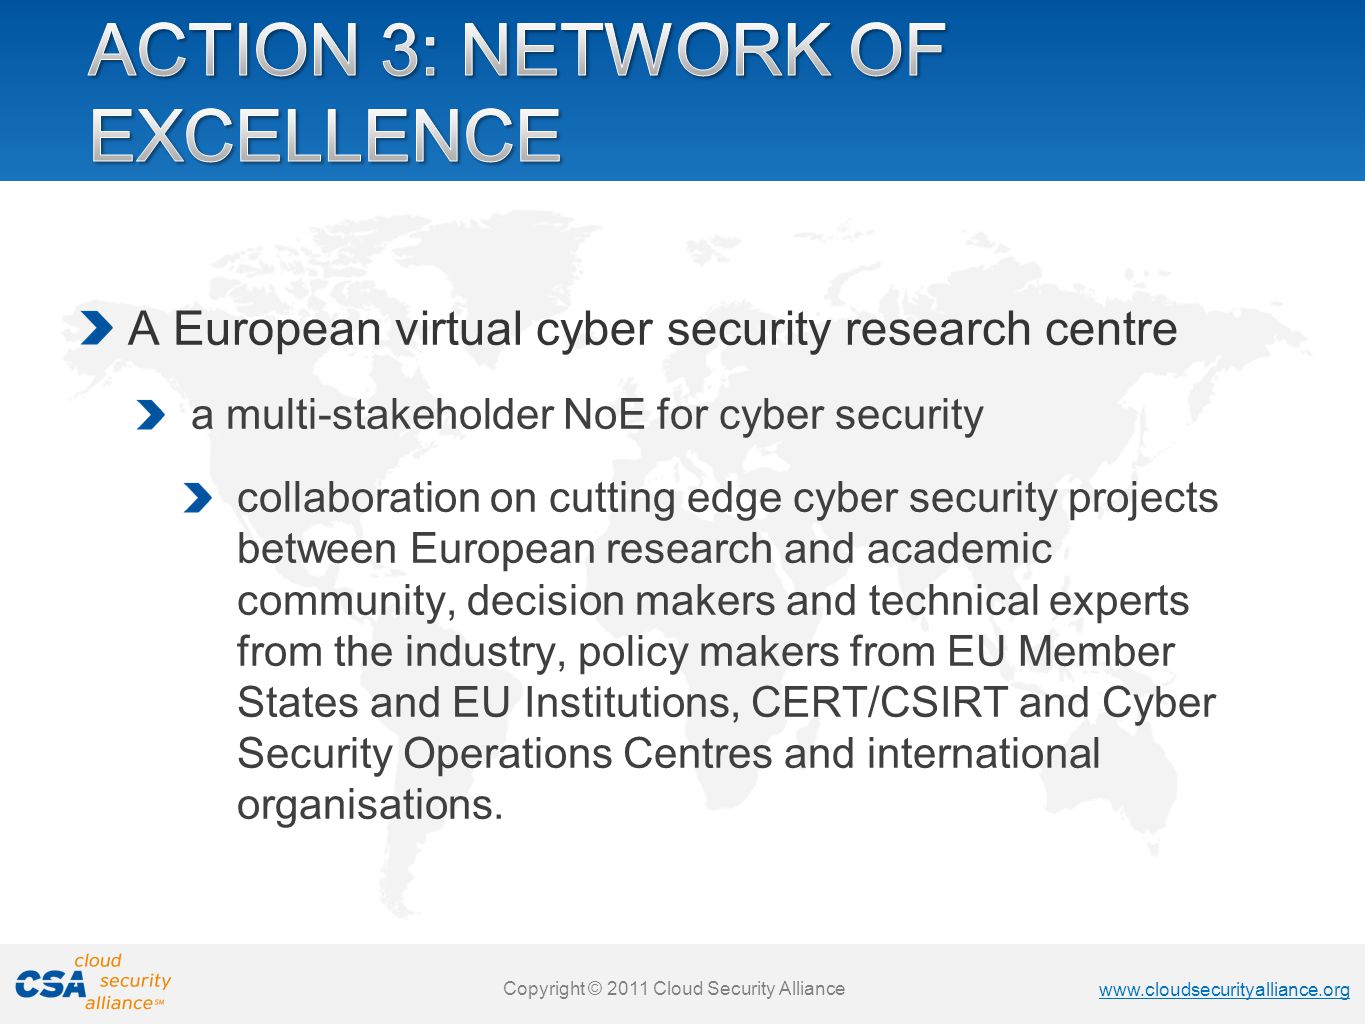 Copyright © 2011 Cloud Security Alliance   Copyright © 2011 Cloud Security Alliance   Copyright © 2011 Cloud Security Alliance   Copyright © 2011 Cloud Security Alliance A European virtual cyber security research centre a multi-stakeholder NoE for cyber security collaboration on cutting edge cyber security projects between European research and academic community, decision makers and technical experts from the industry, policy makers from EU Member States and EU Institutions, CERT/CSIRT and Cyber Security Operations Centres and international organisations.